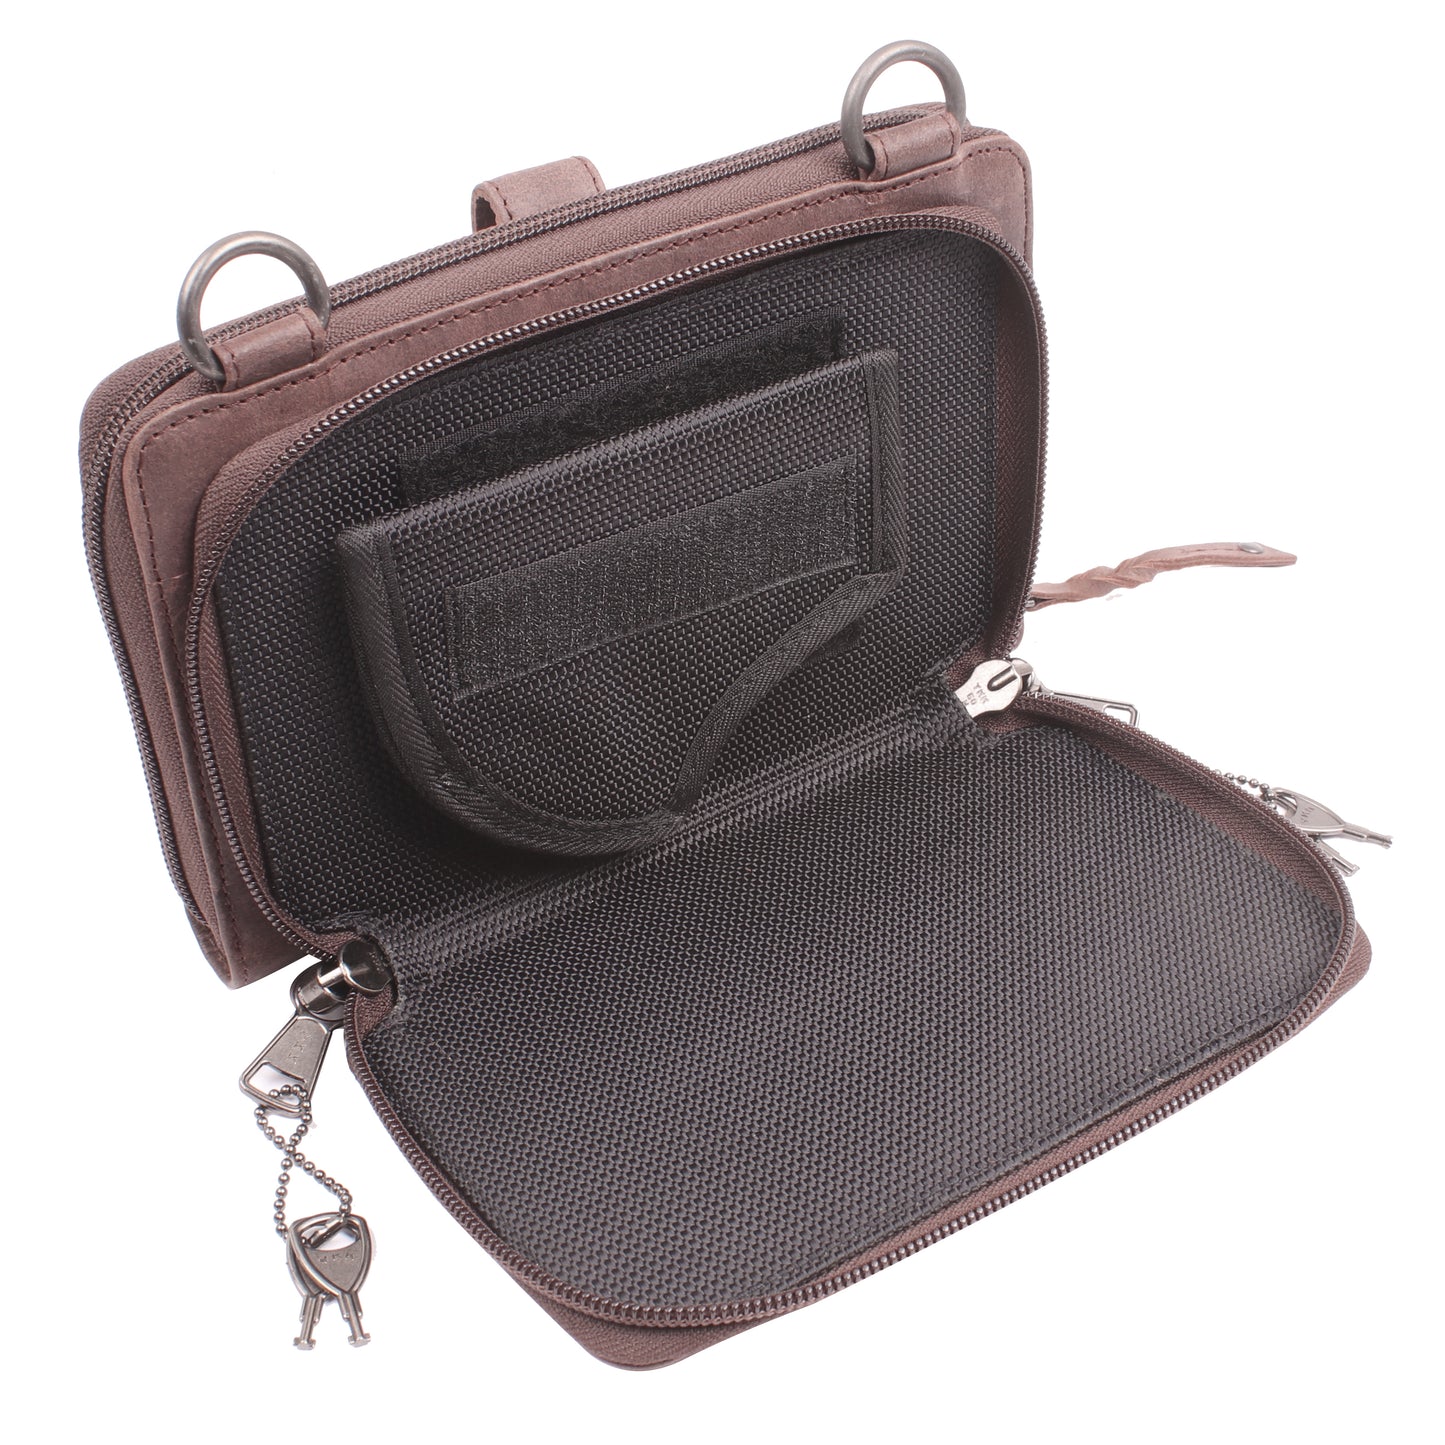 CONCEALED CARRY MILLIE LEATHER CROSSBODY ORGANIZER